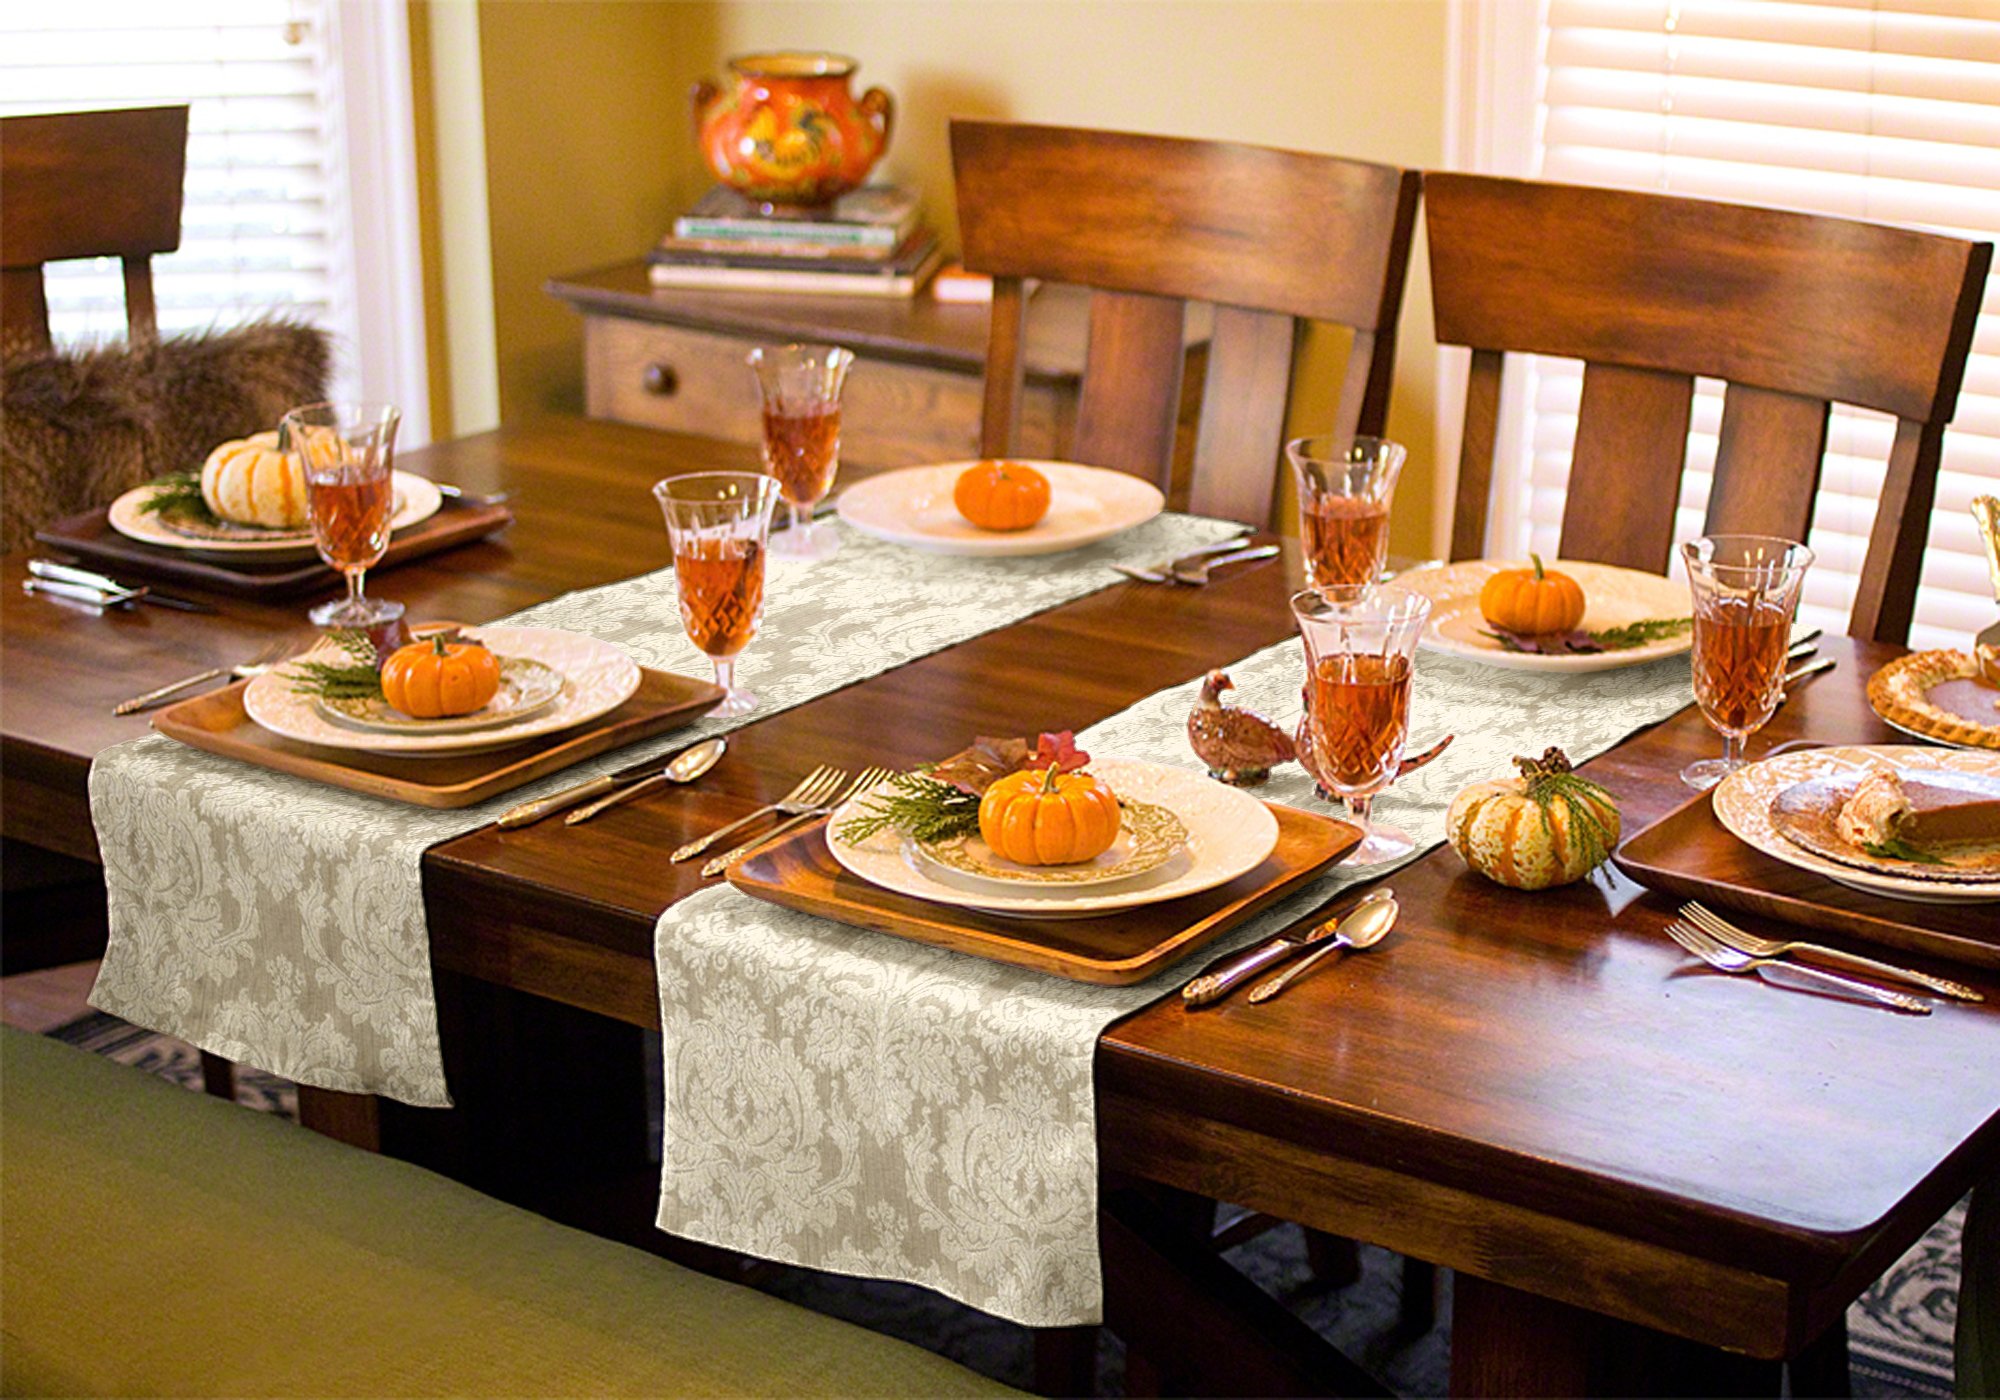 Seasonal table runners can be used in a variety of ways. Use one down the length of your table, or use a pair across the width of your dining table to create a sophisticated scene.